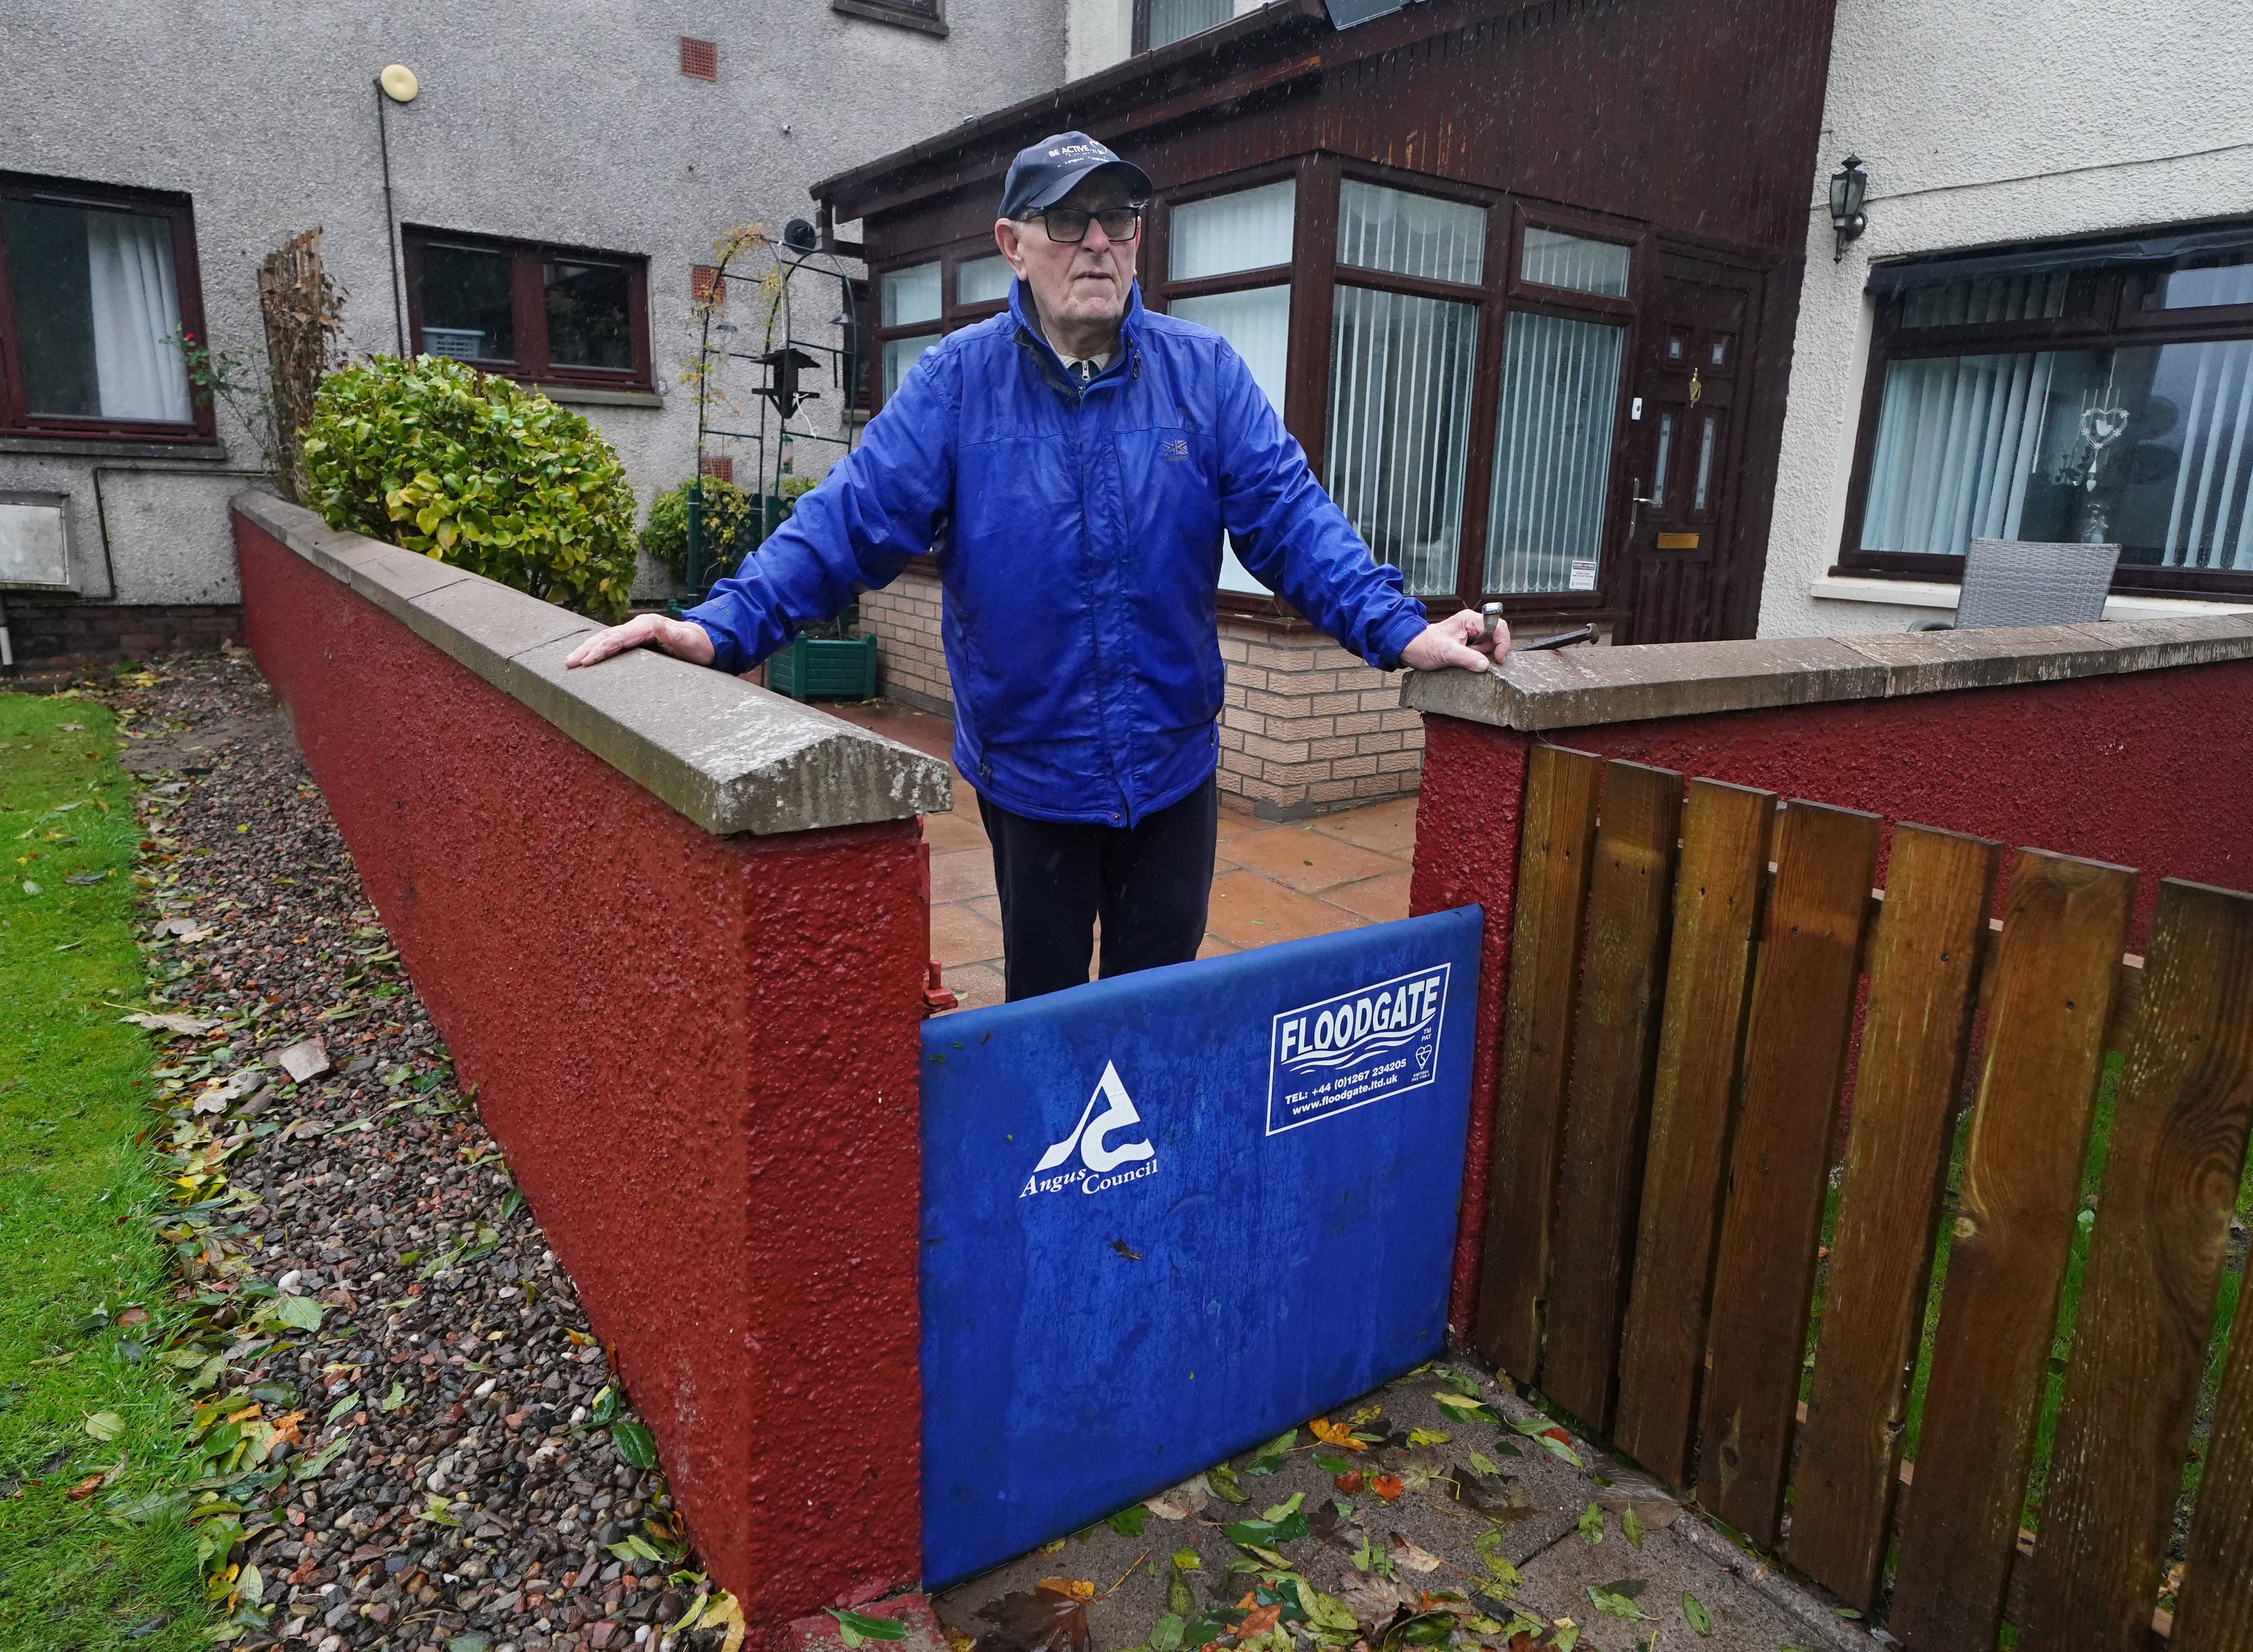 John Stewart, 82, of Brechin, said he will not be leaving his home